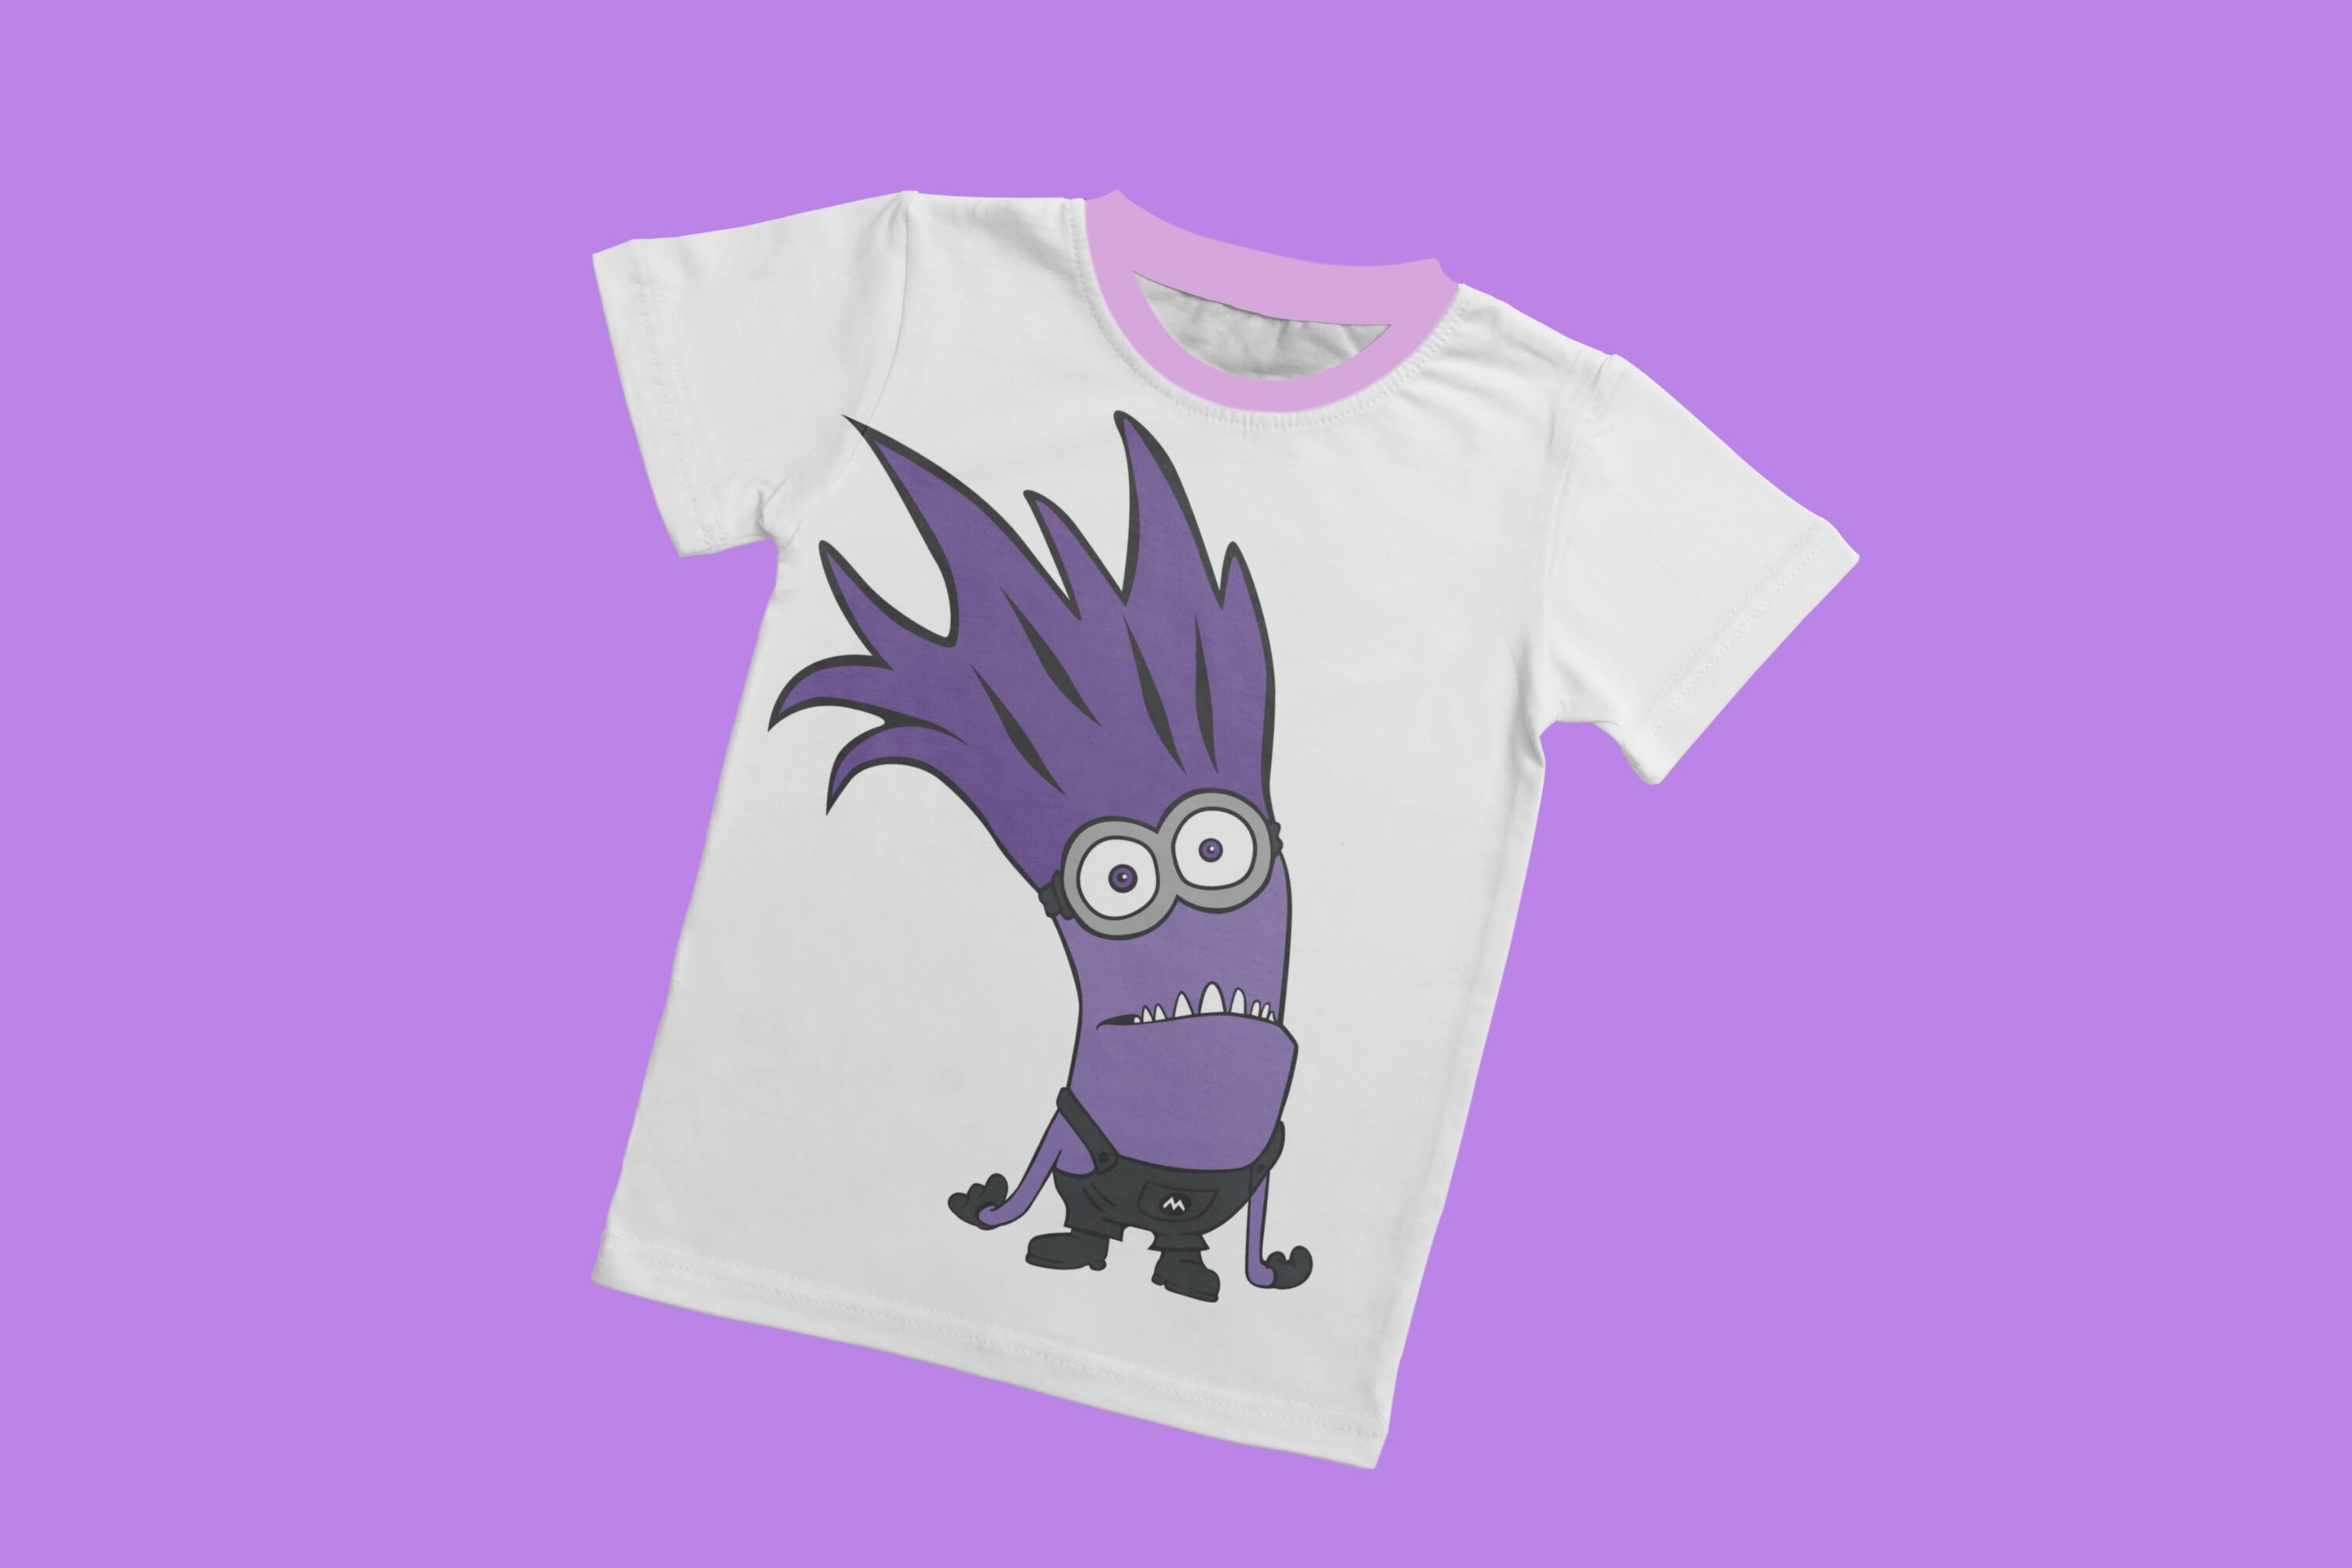 A white T-shirt with a lavender collar and a puzzled evil minion.